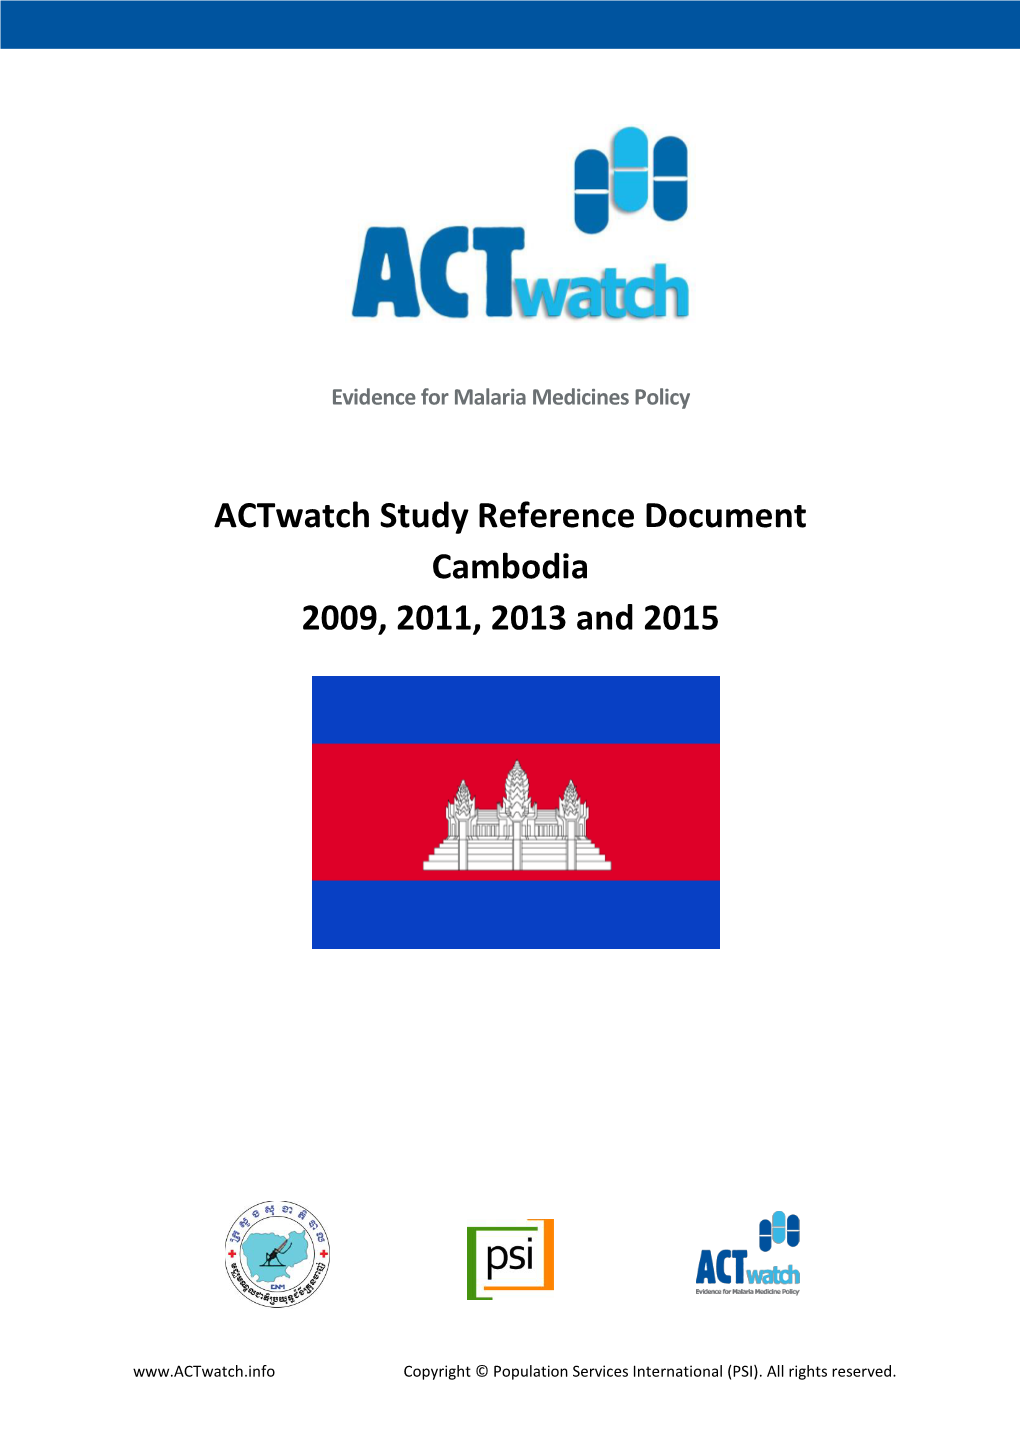 Actwatch Study Reference Document Cambodia 2009, 2011, 2013 and 2015